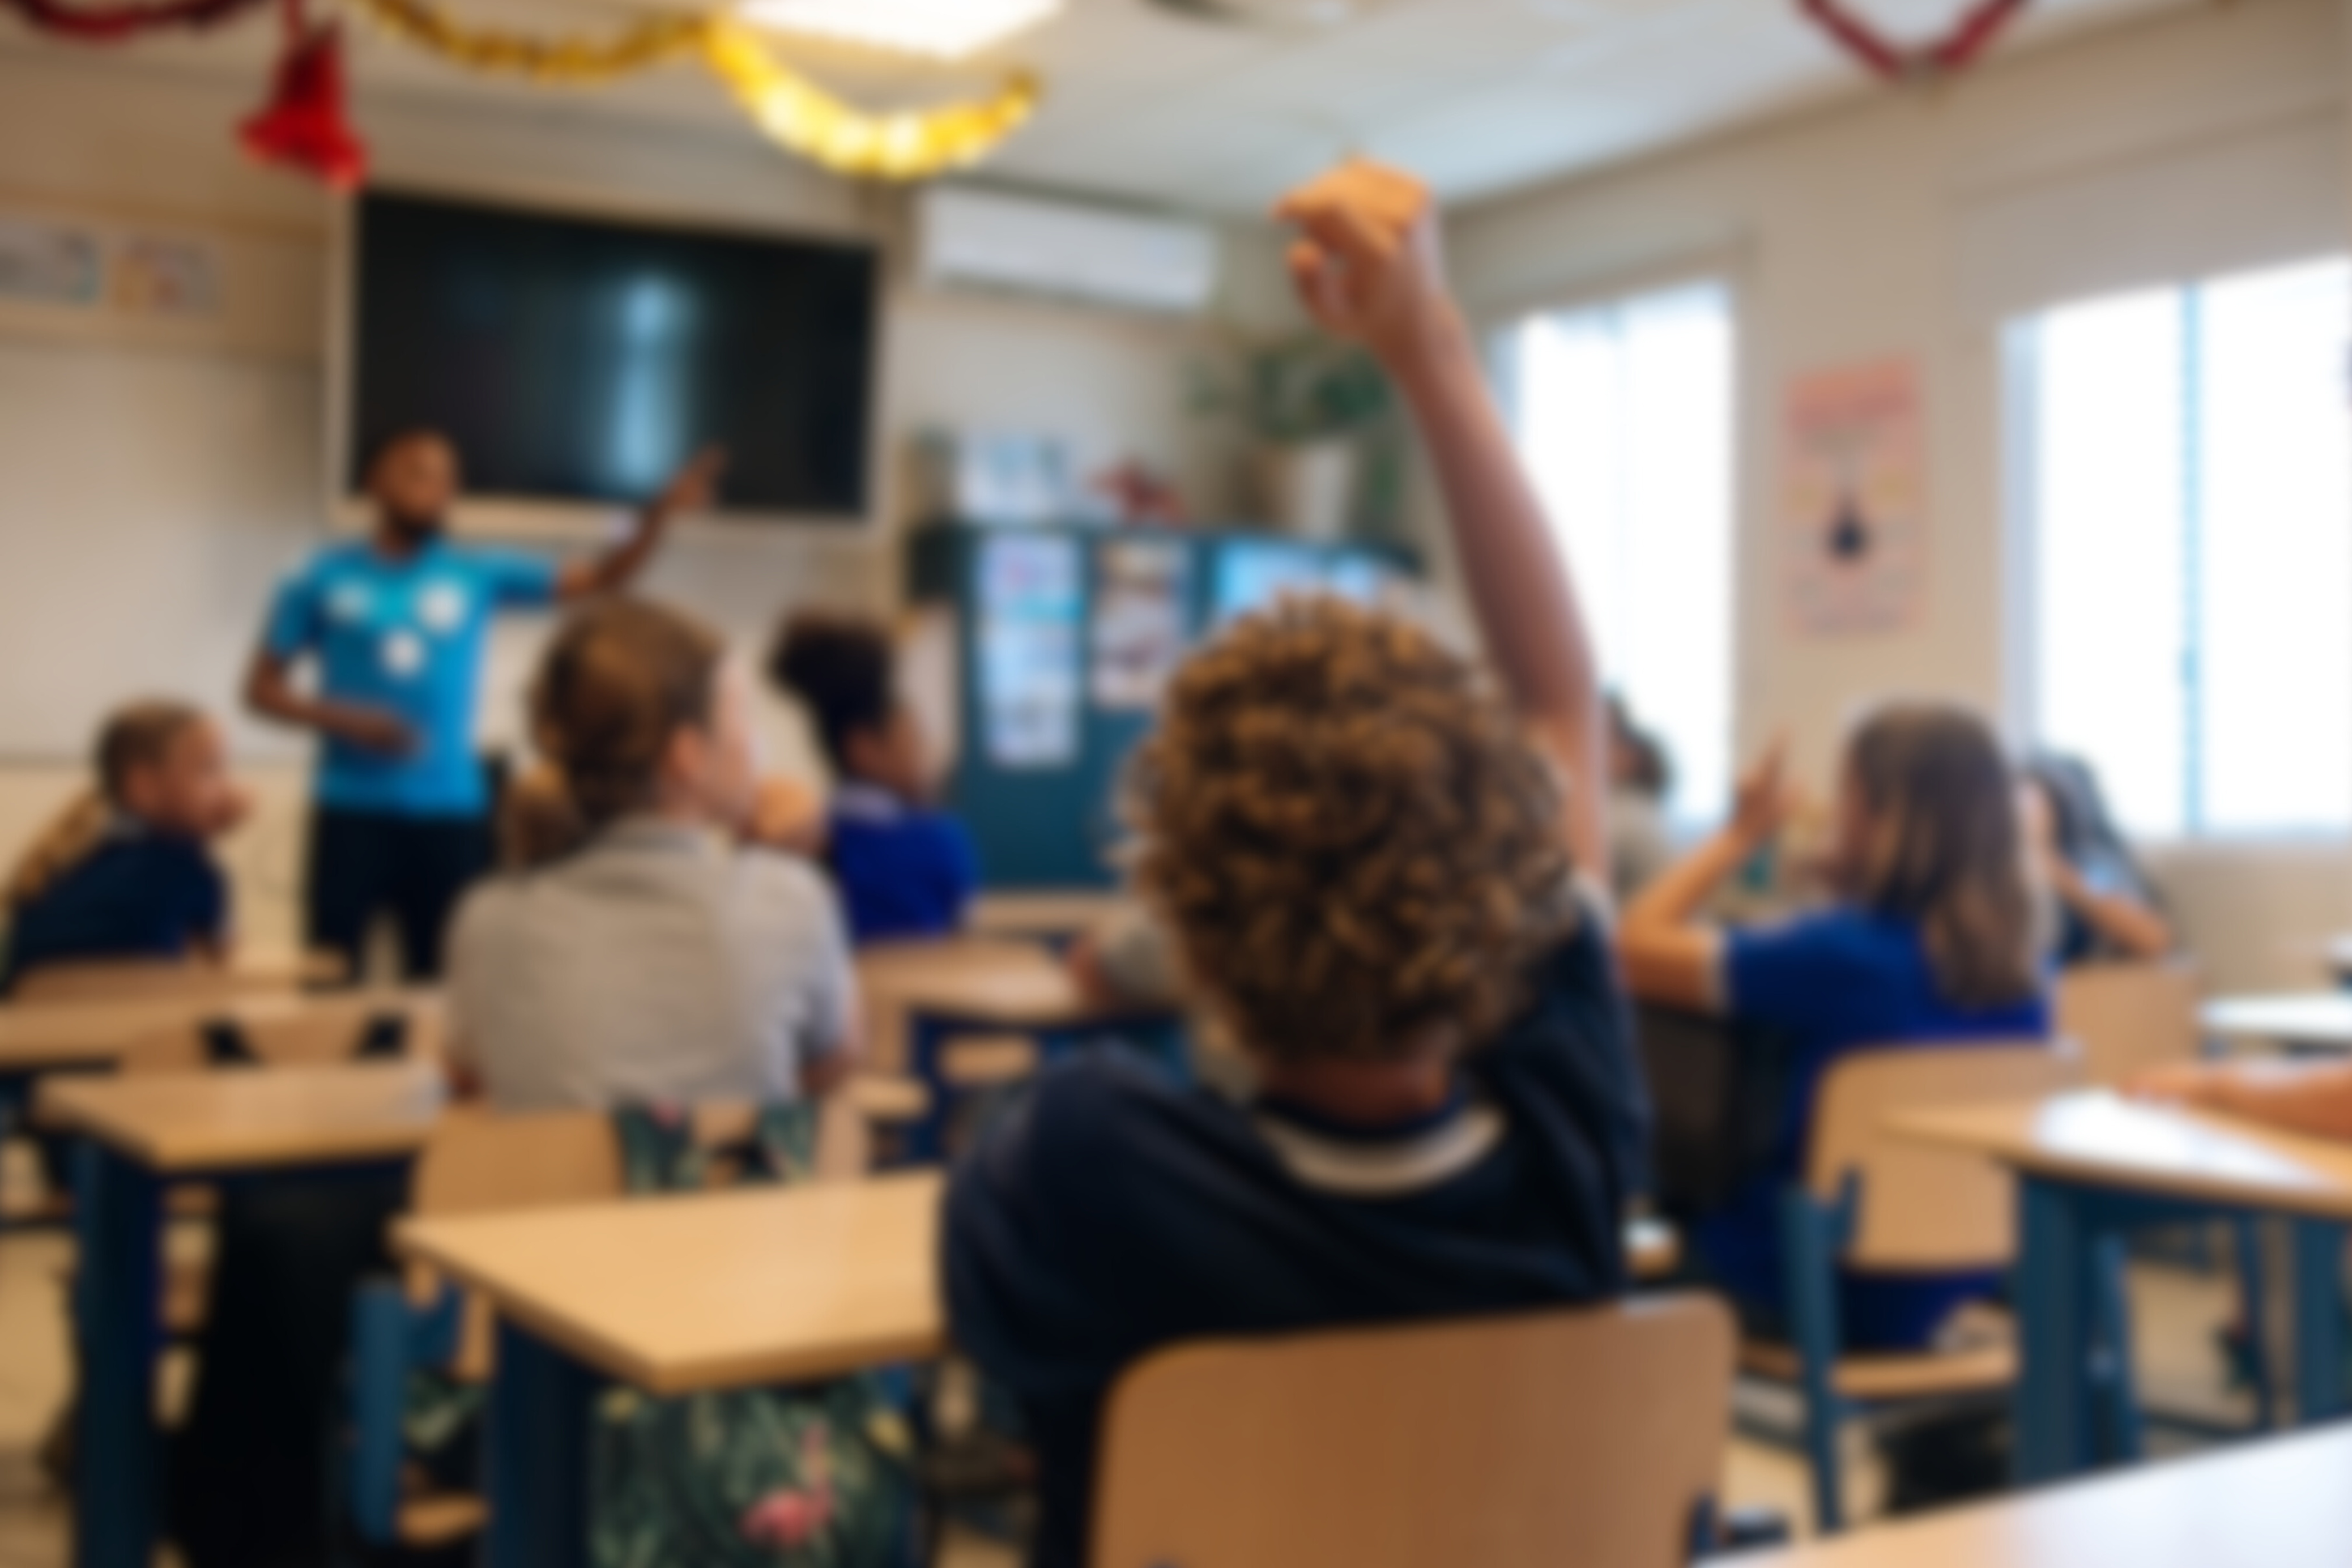 student raises hand in middle school classroom - illustrative image for MTSSB promo